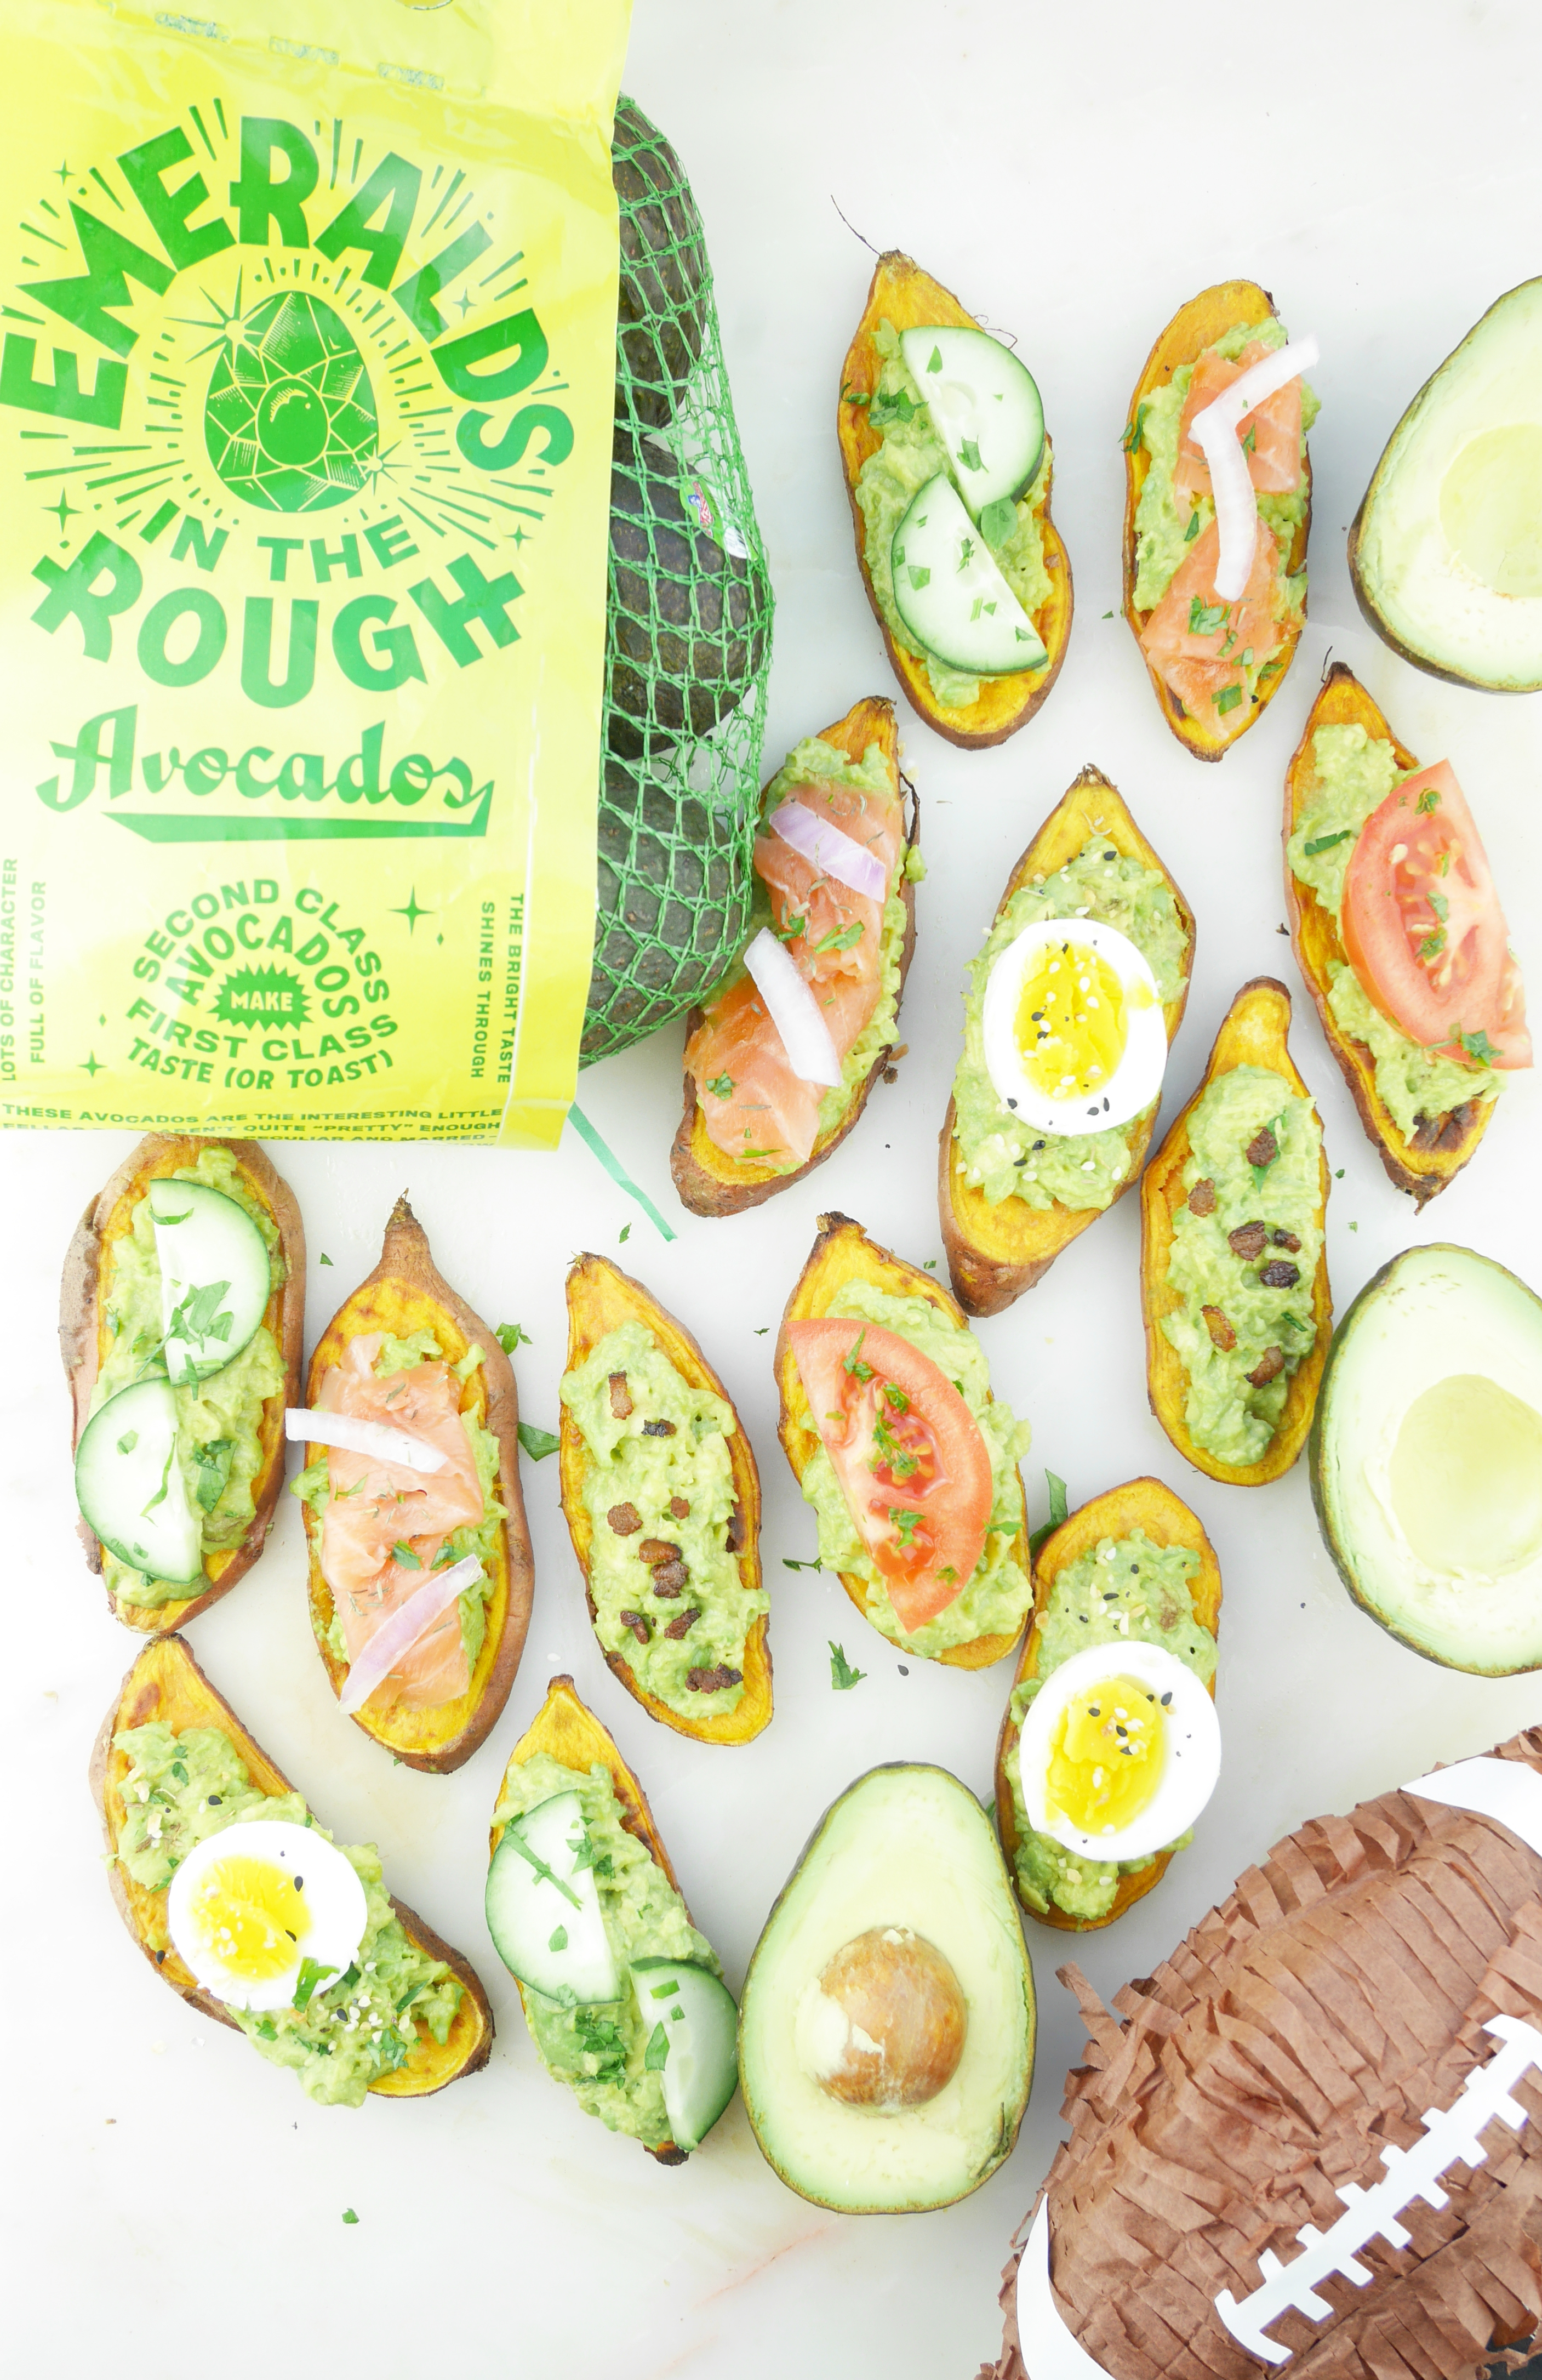 Mission Produce Emeralds in the Rough avocados